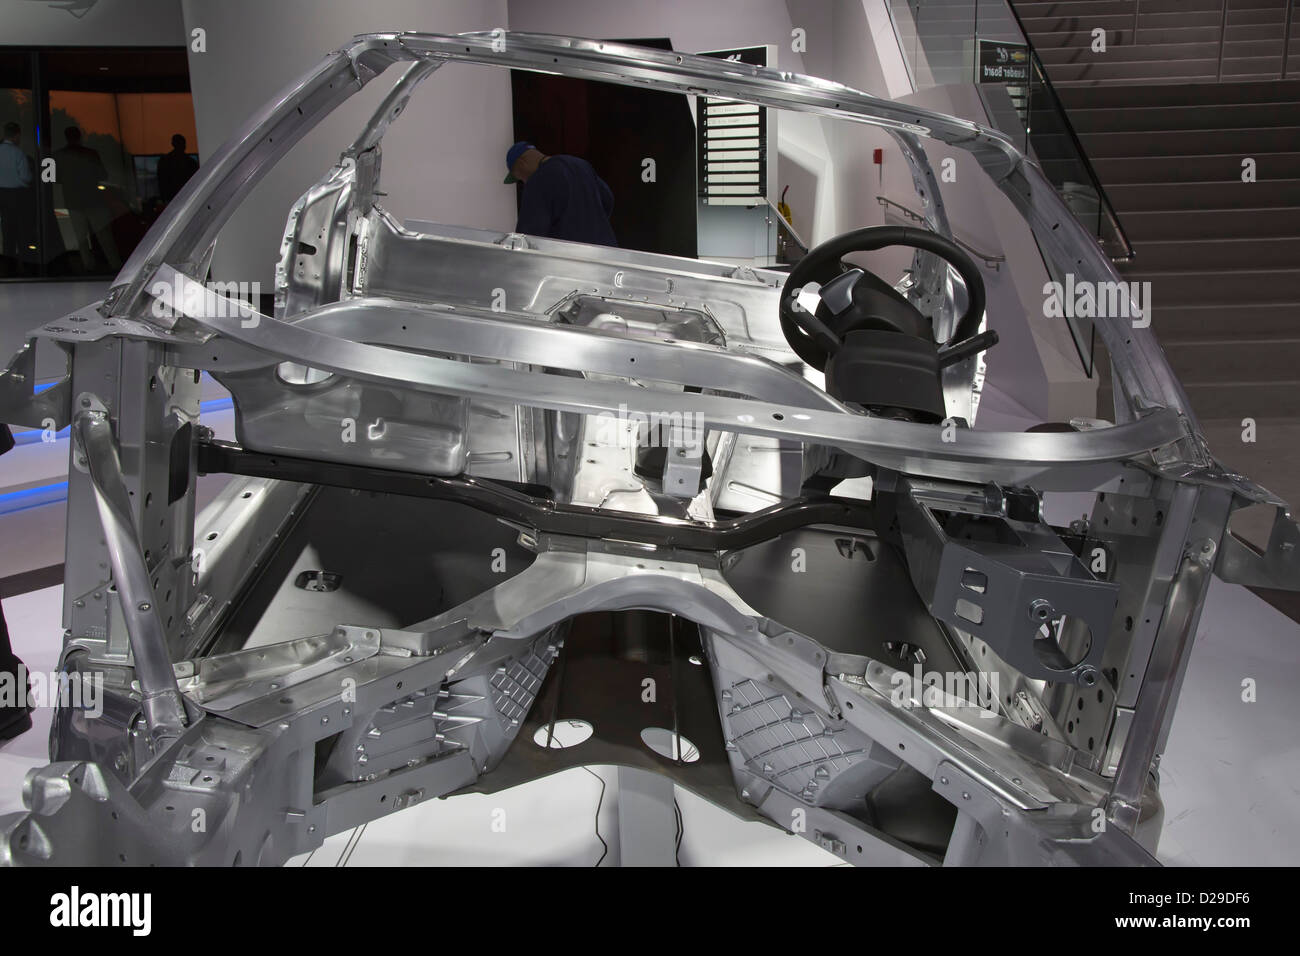 Detroit, Michigan - The aluminum frame of a Chevrolet Corvette on display at the North American International Auto Show. Stock Photo